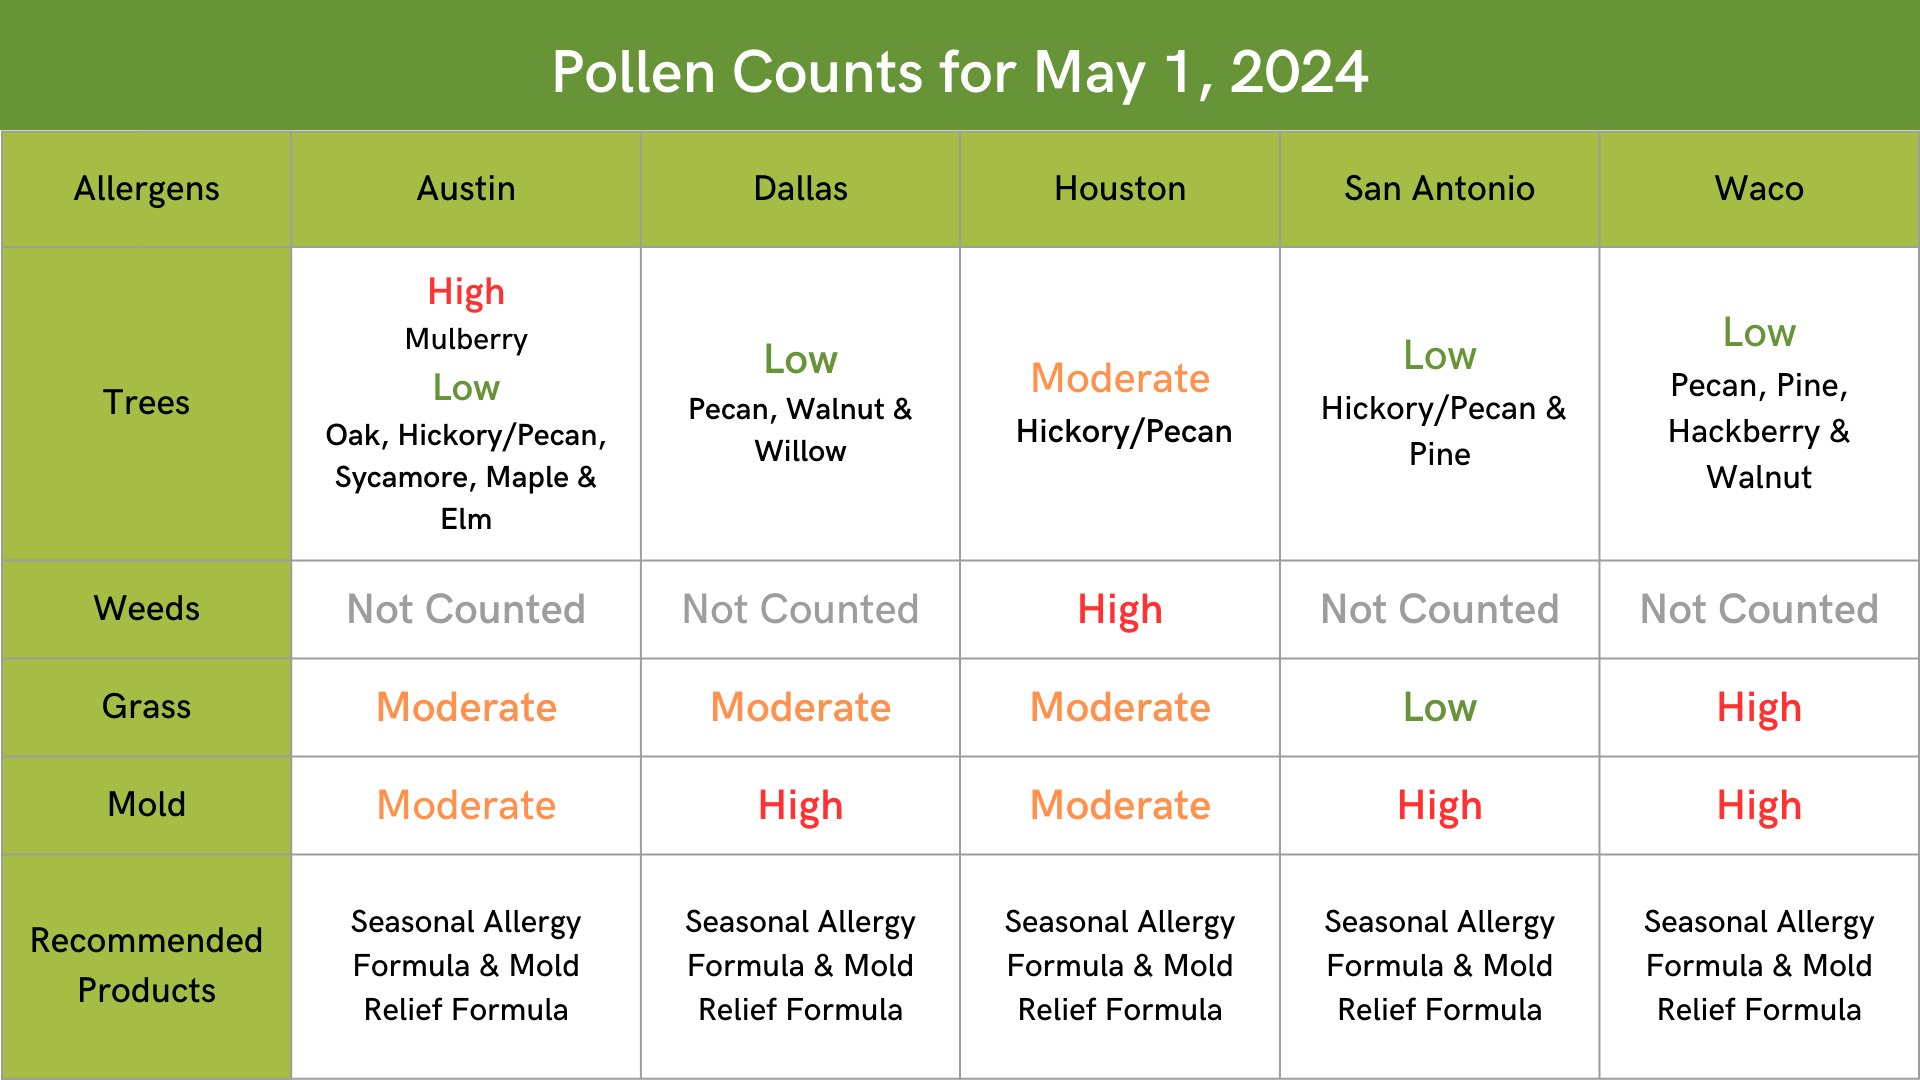 Texas Allergy Pollen Count of Trees, Weeds, Grass and Mold in Austin, Dallas, Houston, San Antonio and Waco on May 1, 2024